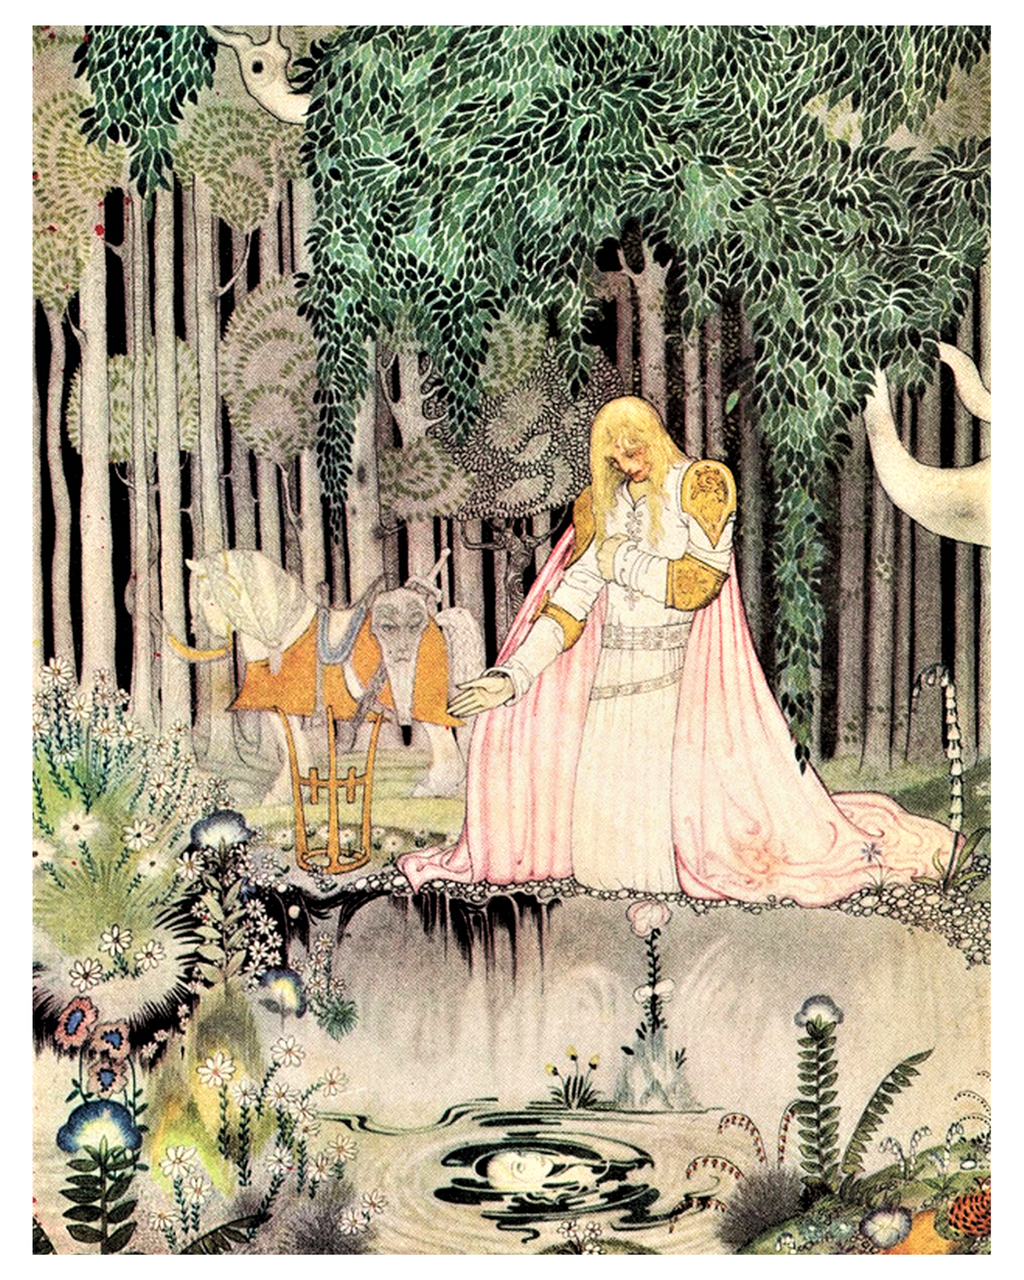 Kay Nielsen folklore illustration poster is from a story called The Lassie and her Godmother